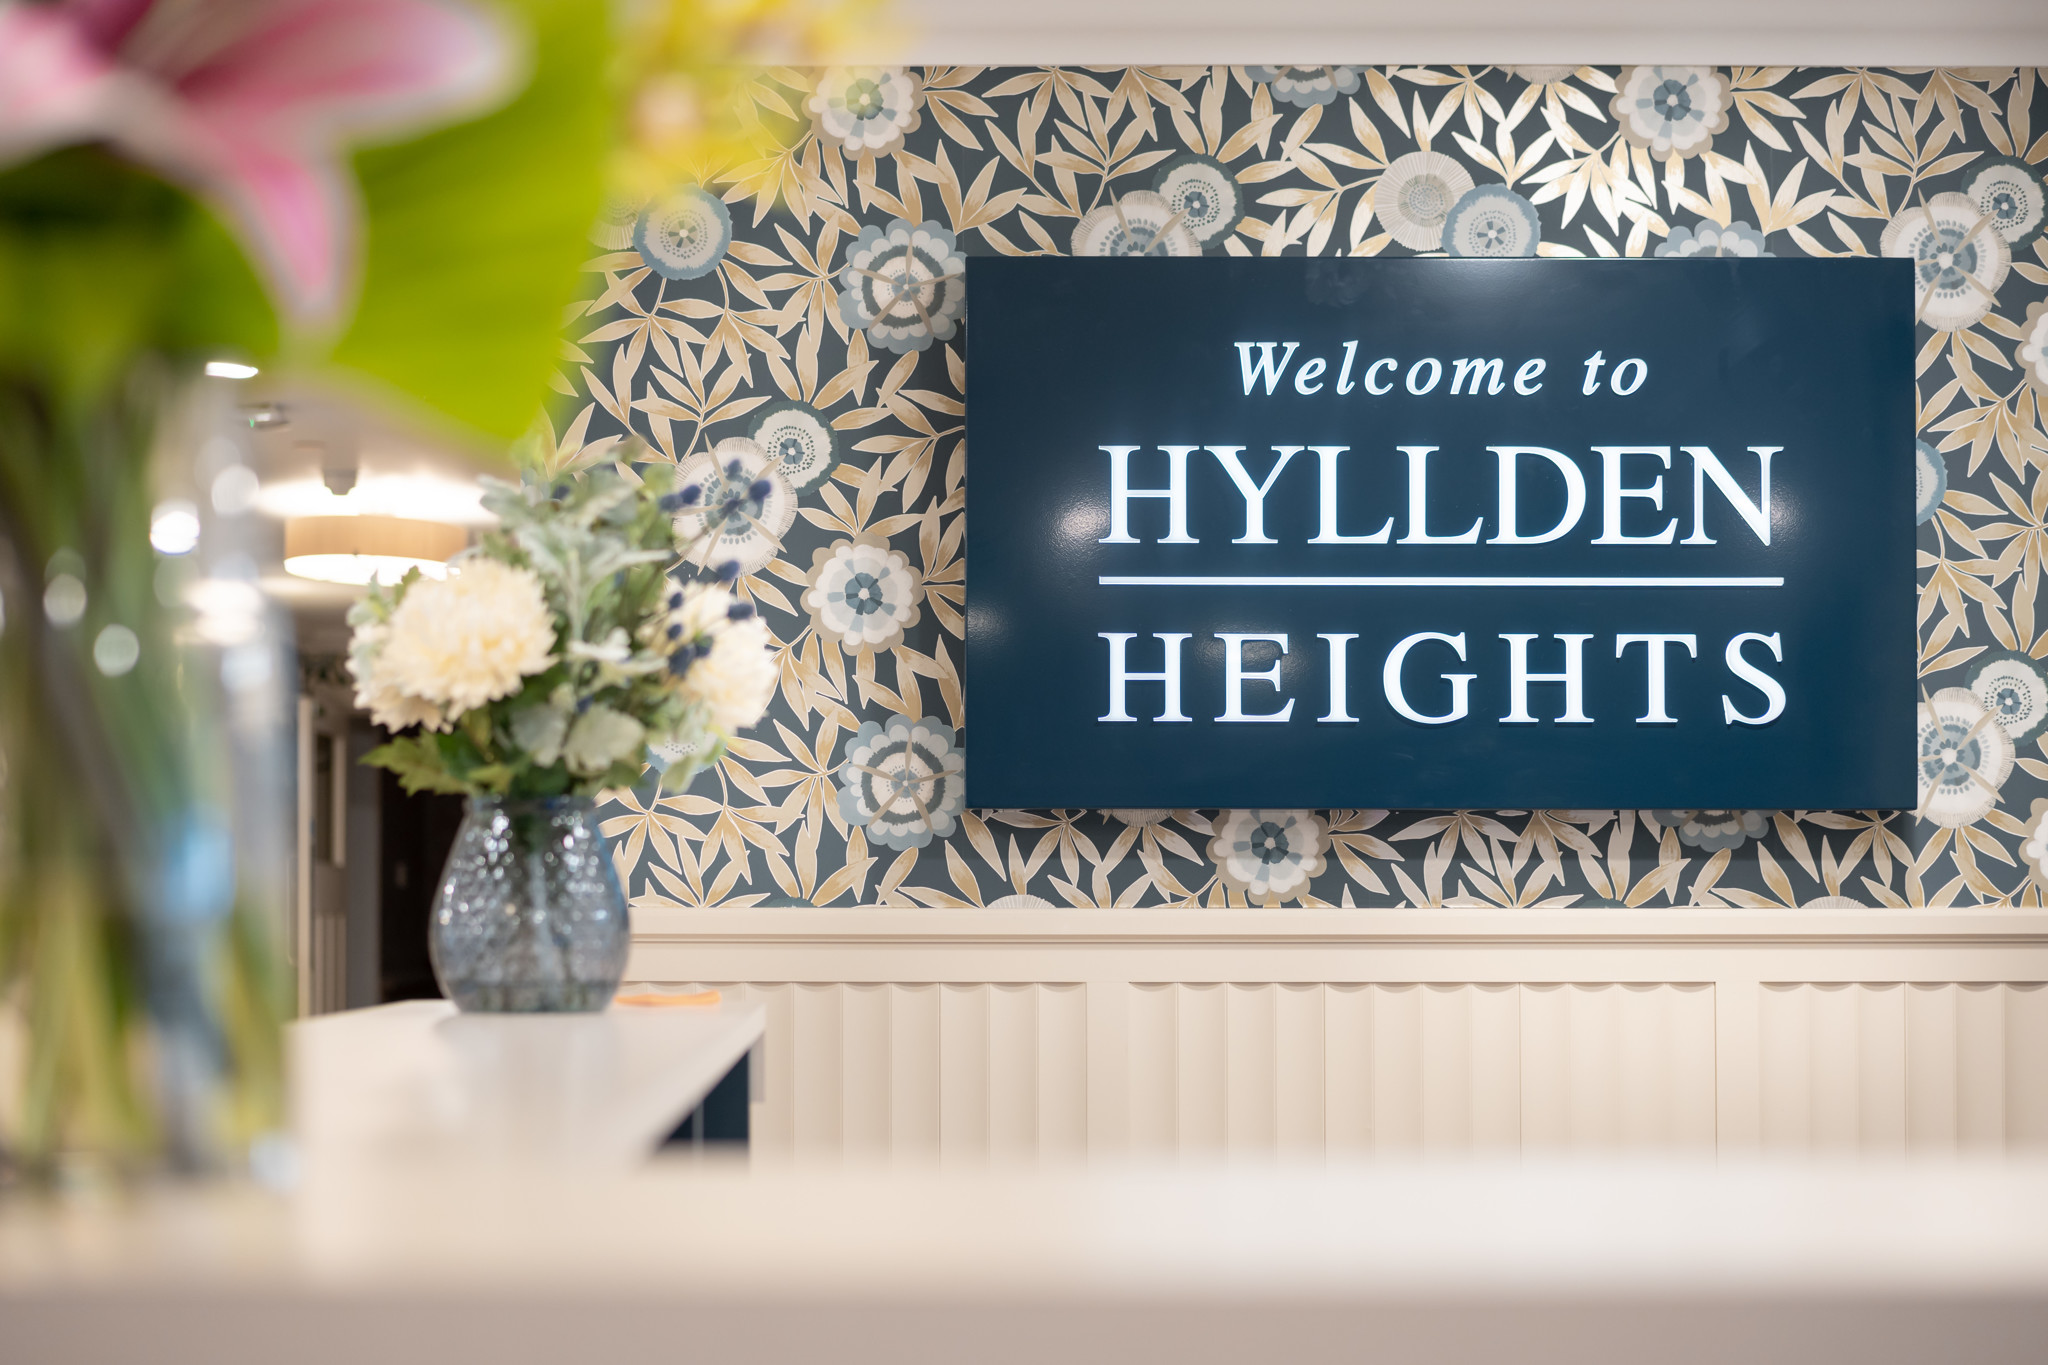 Hyllden Heights Care Home